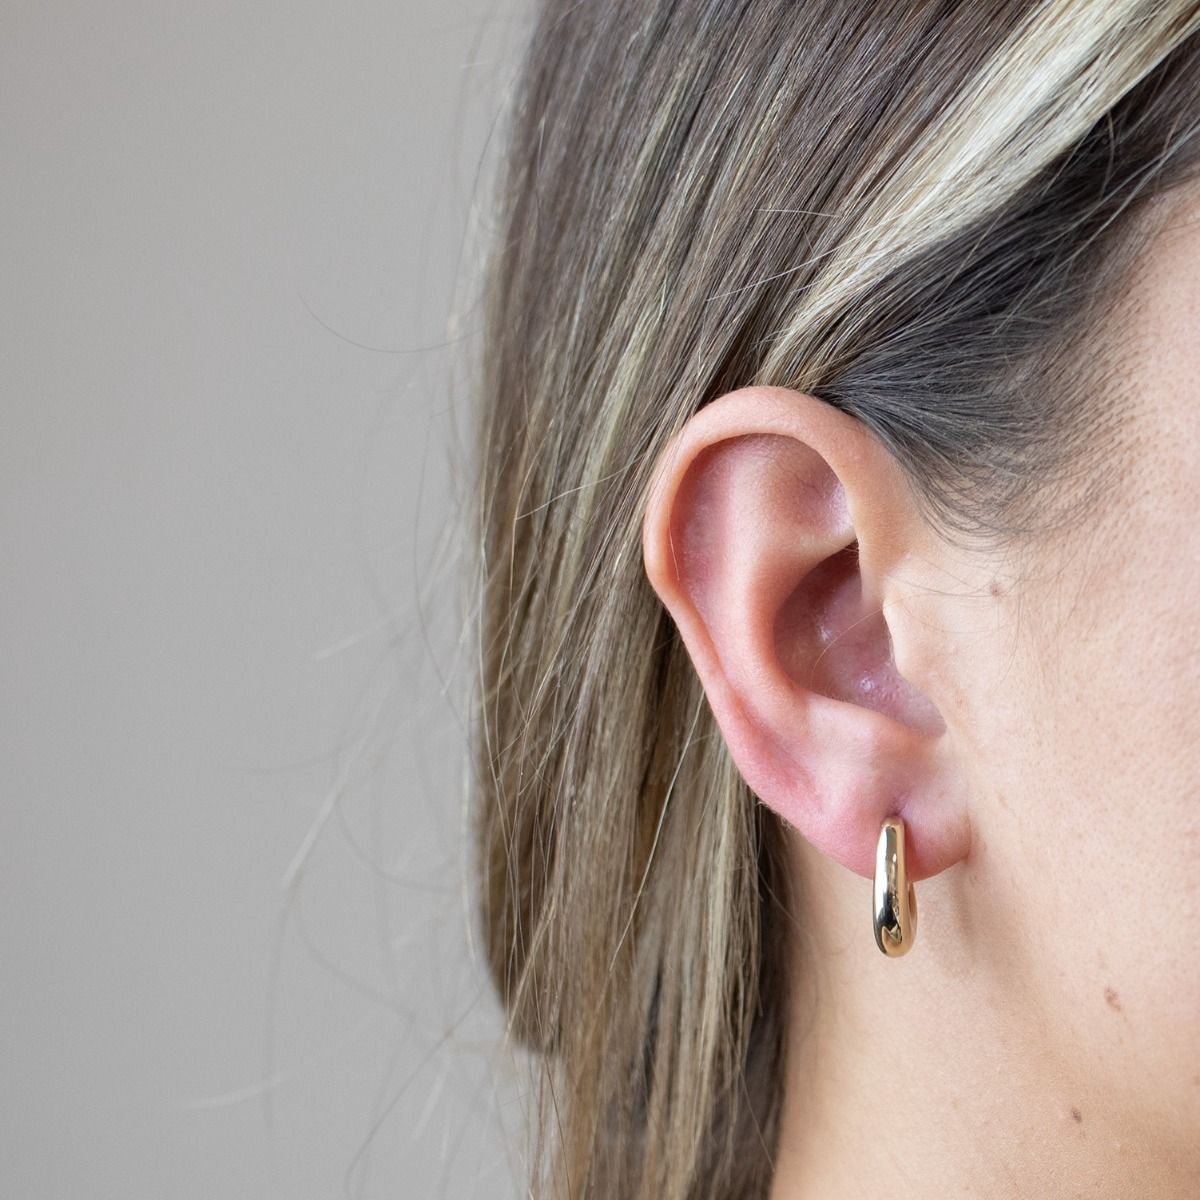 
The Polished Gold Stud Hoop Earrings are a classic and elegant accessory. With their polished gold finish and hoop design, these earrings exude sophistication. The 17mm size offers a balanced and versatile look, making them suitable for both casual and 